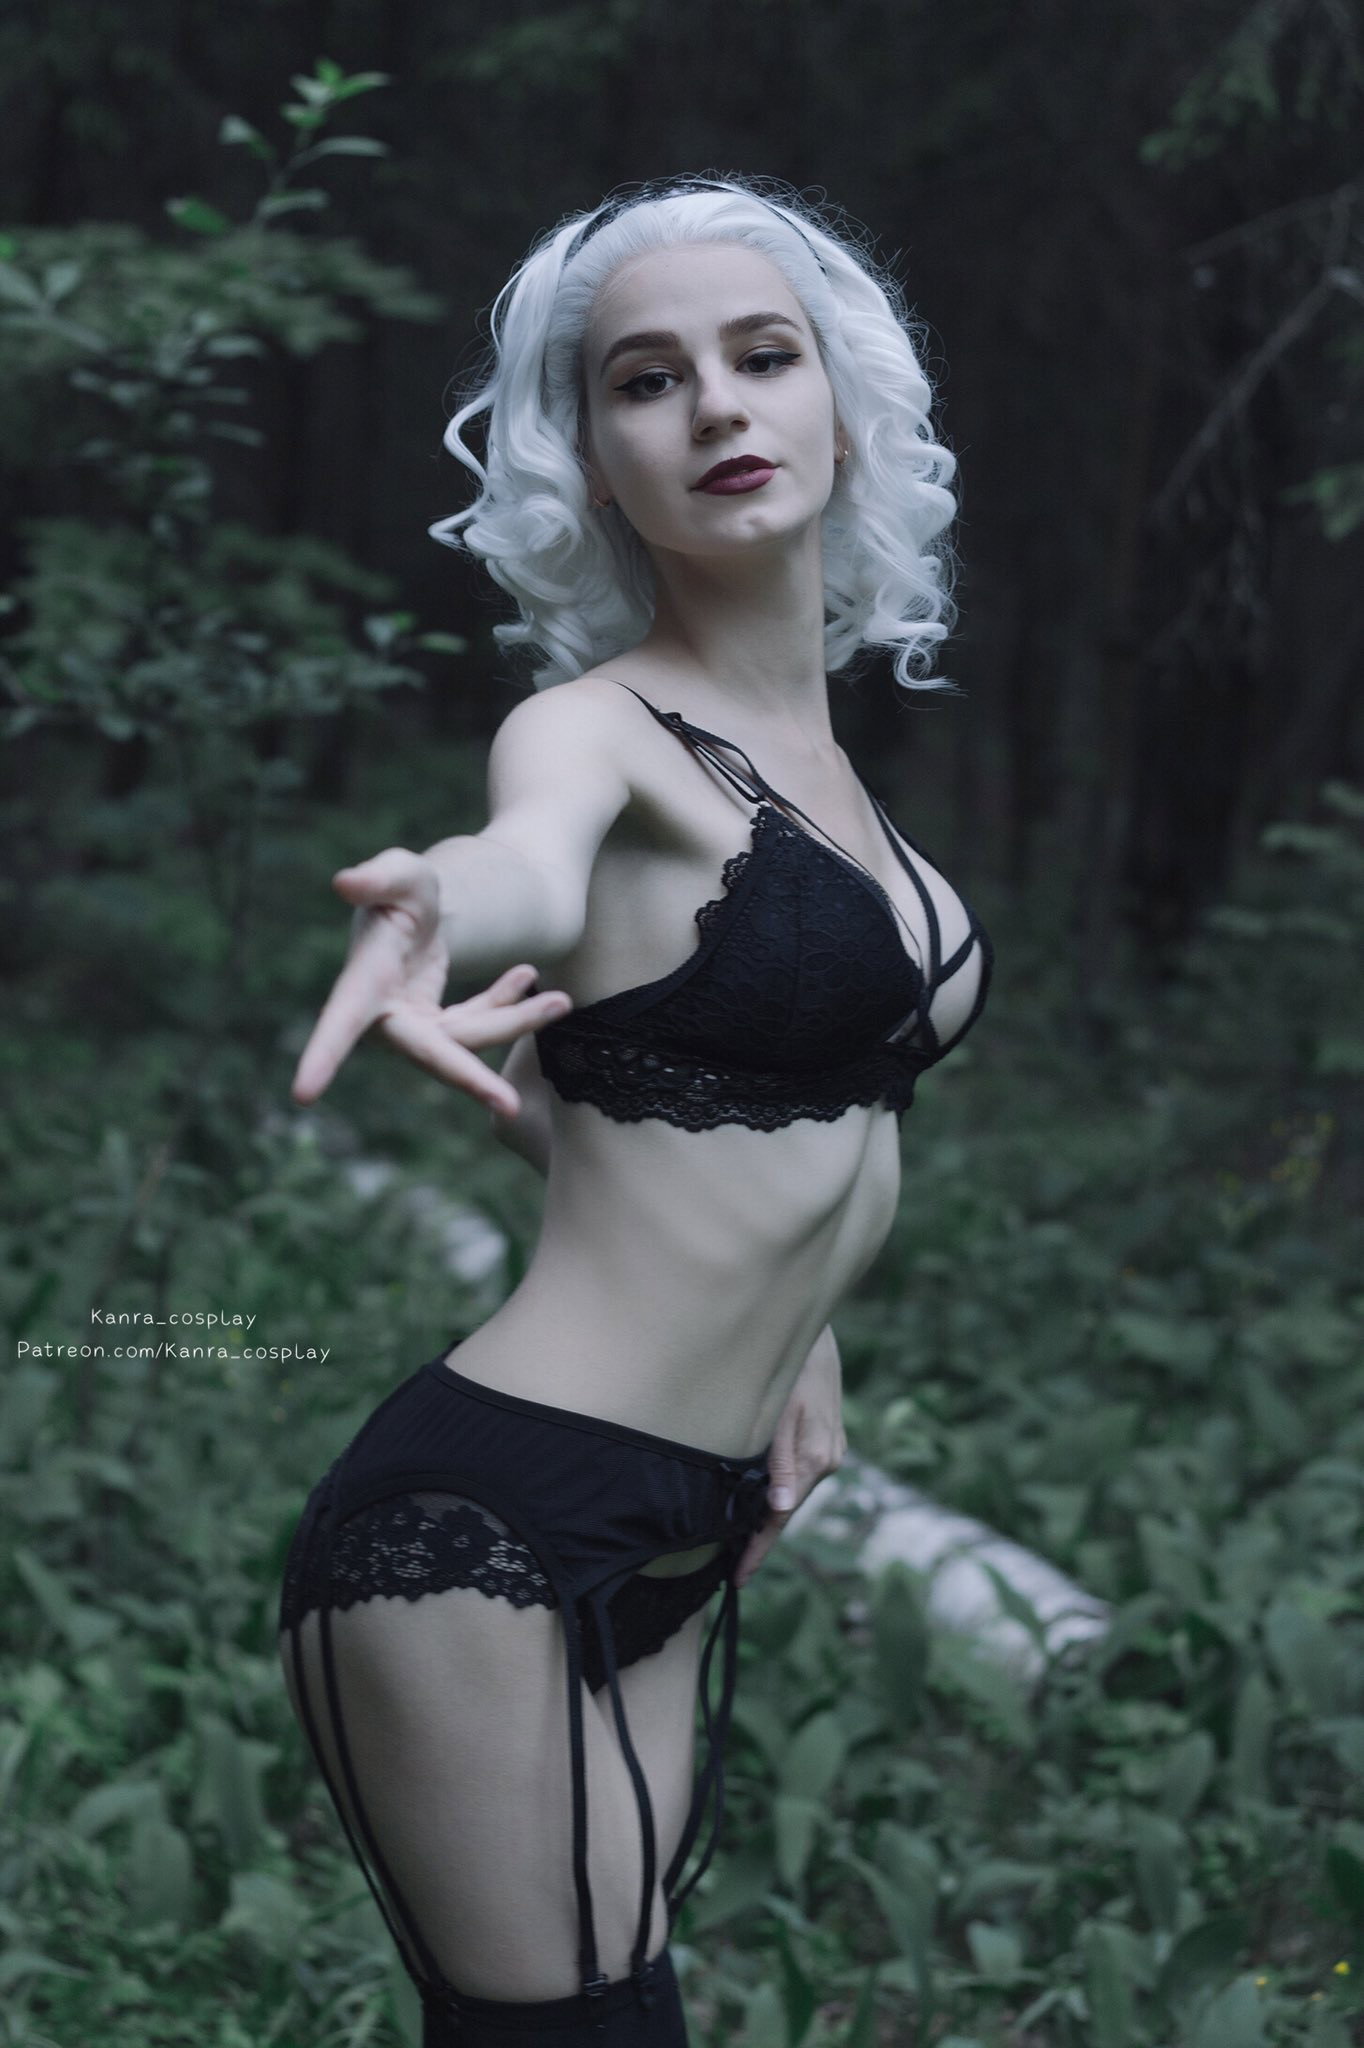 Watch the Photo by American Brit with the username @Dnddom1992, posted on December 5, 2020. The post is about the topic Amateurs. and the text says 'patreon.com/Kanra_cosplay #sabrina #witch #cosplay'